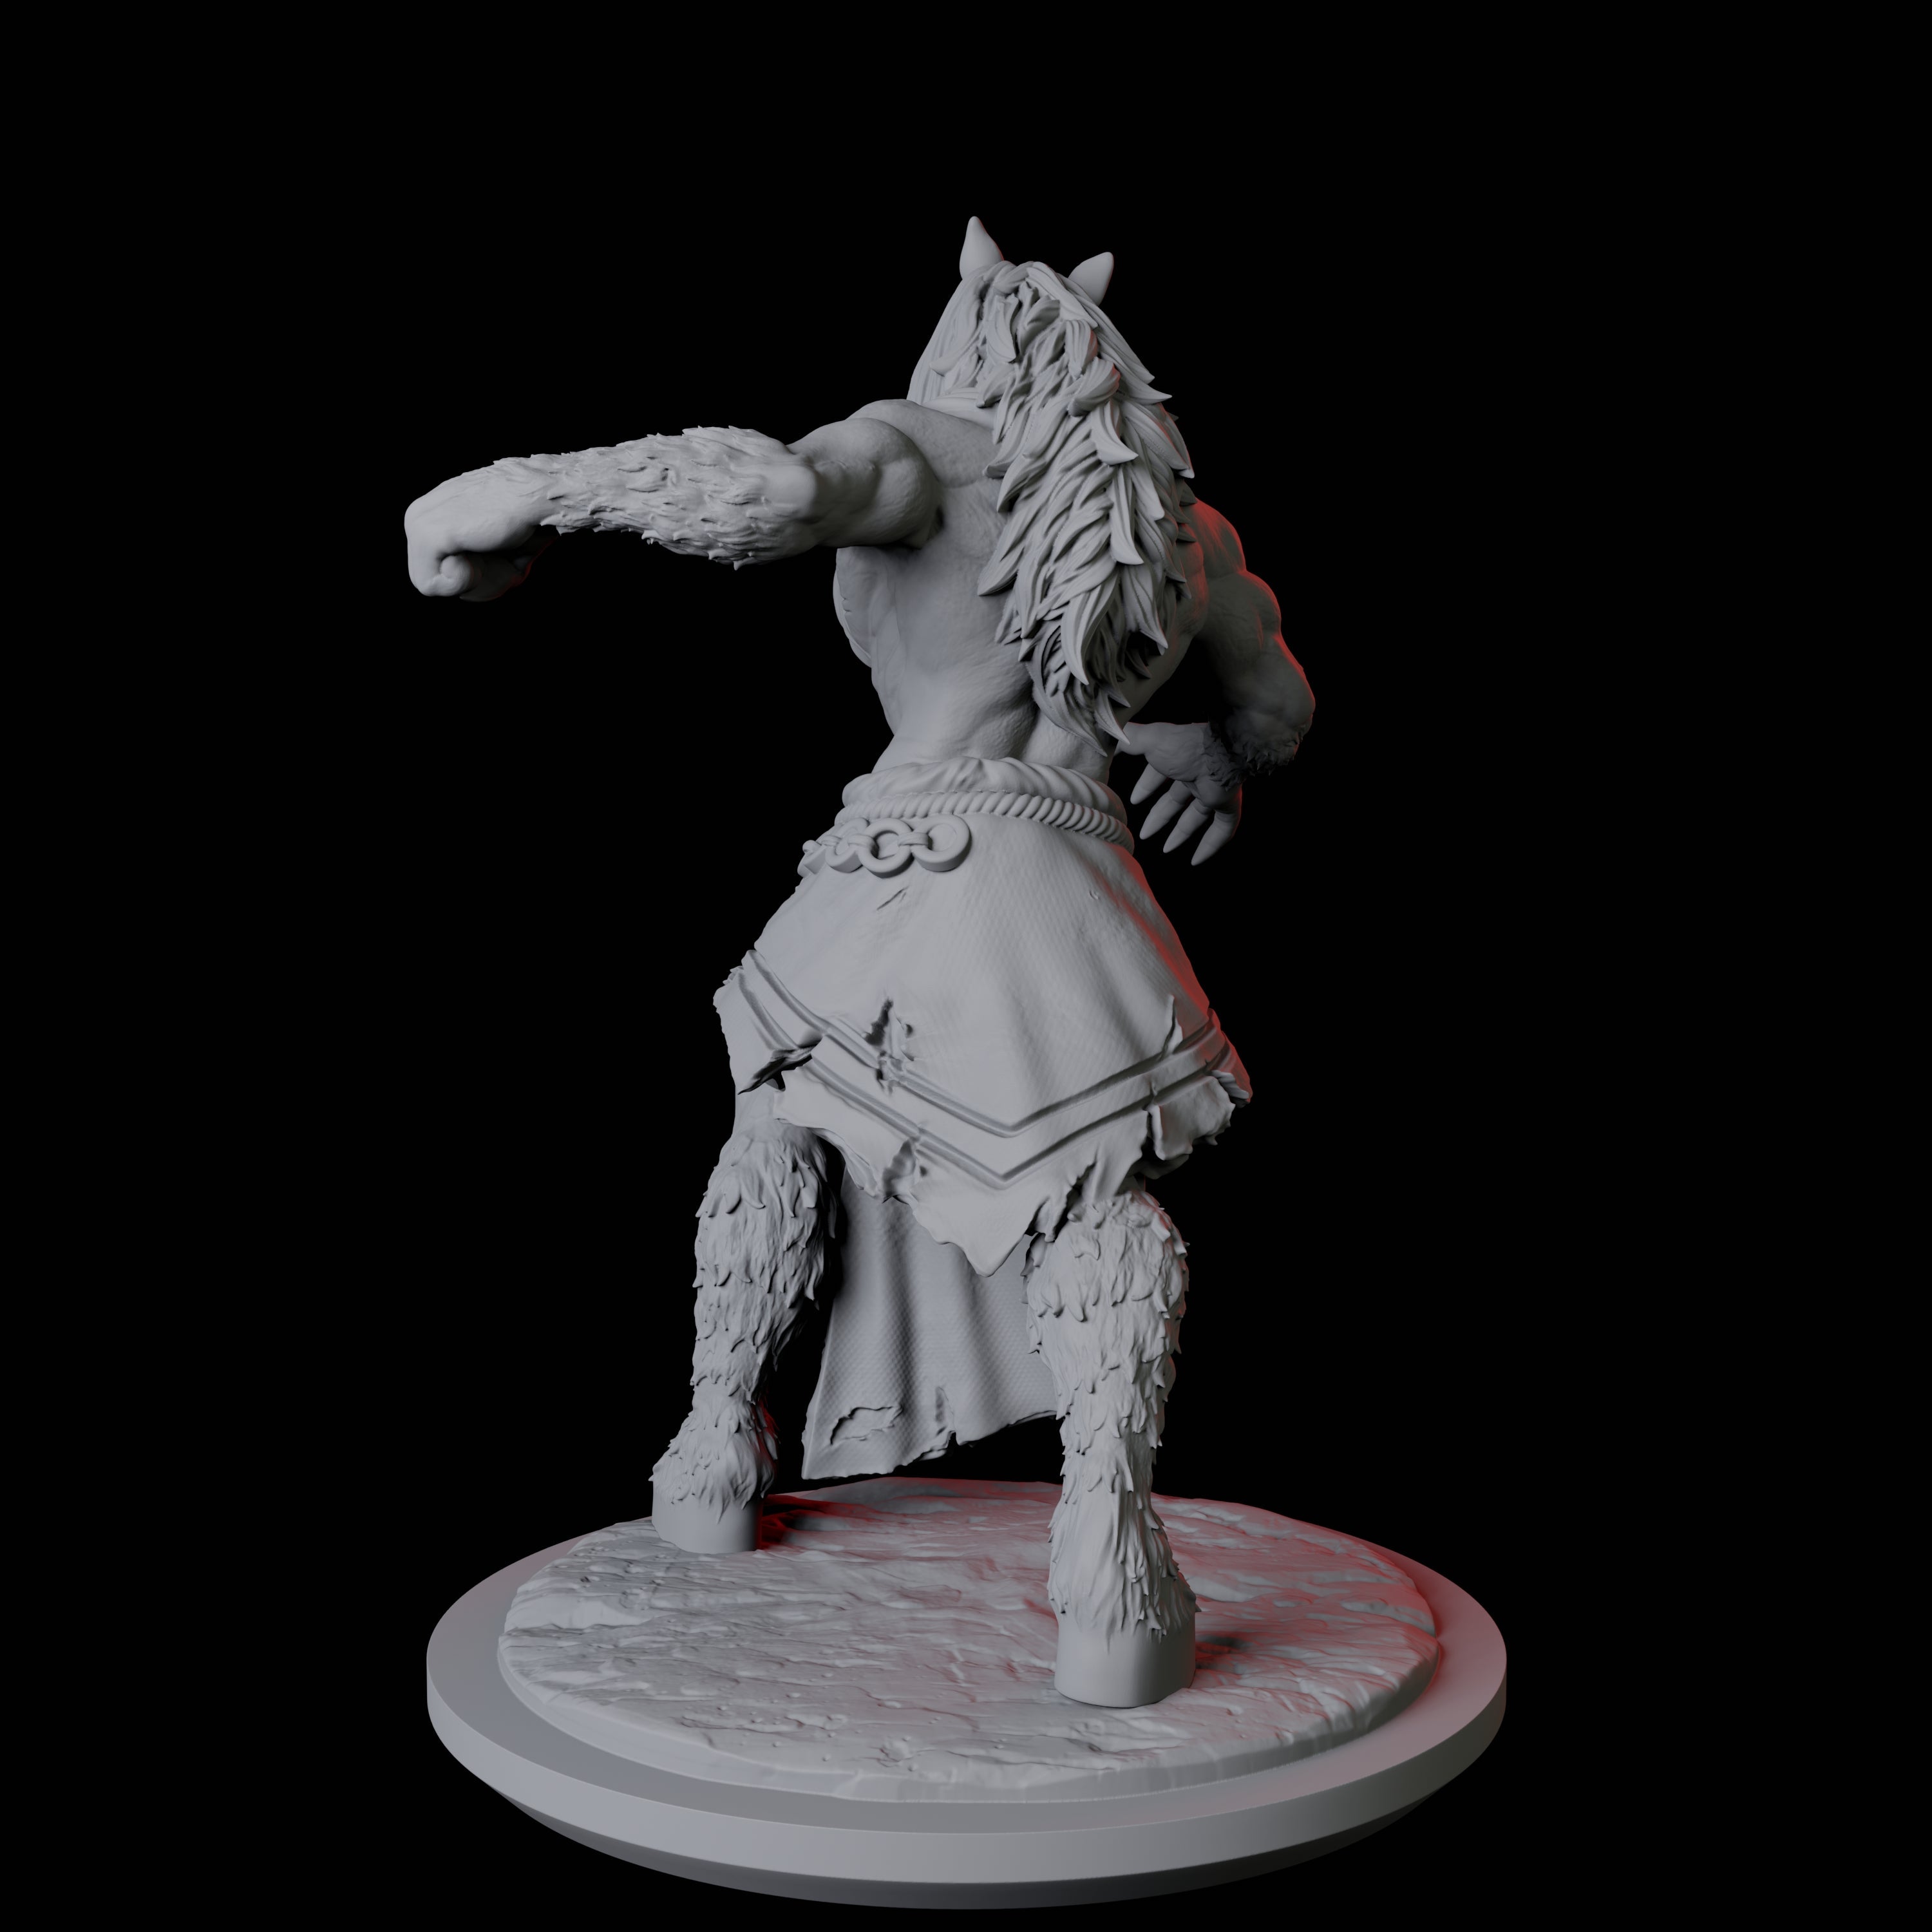 Neighing Reverse Centaur B Miniature for Dungeons and Dragons, Pathfinder or other TTRPGs